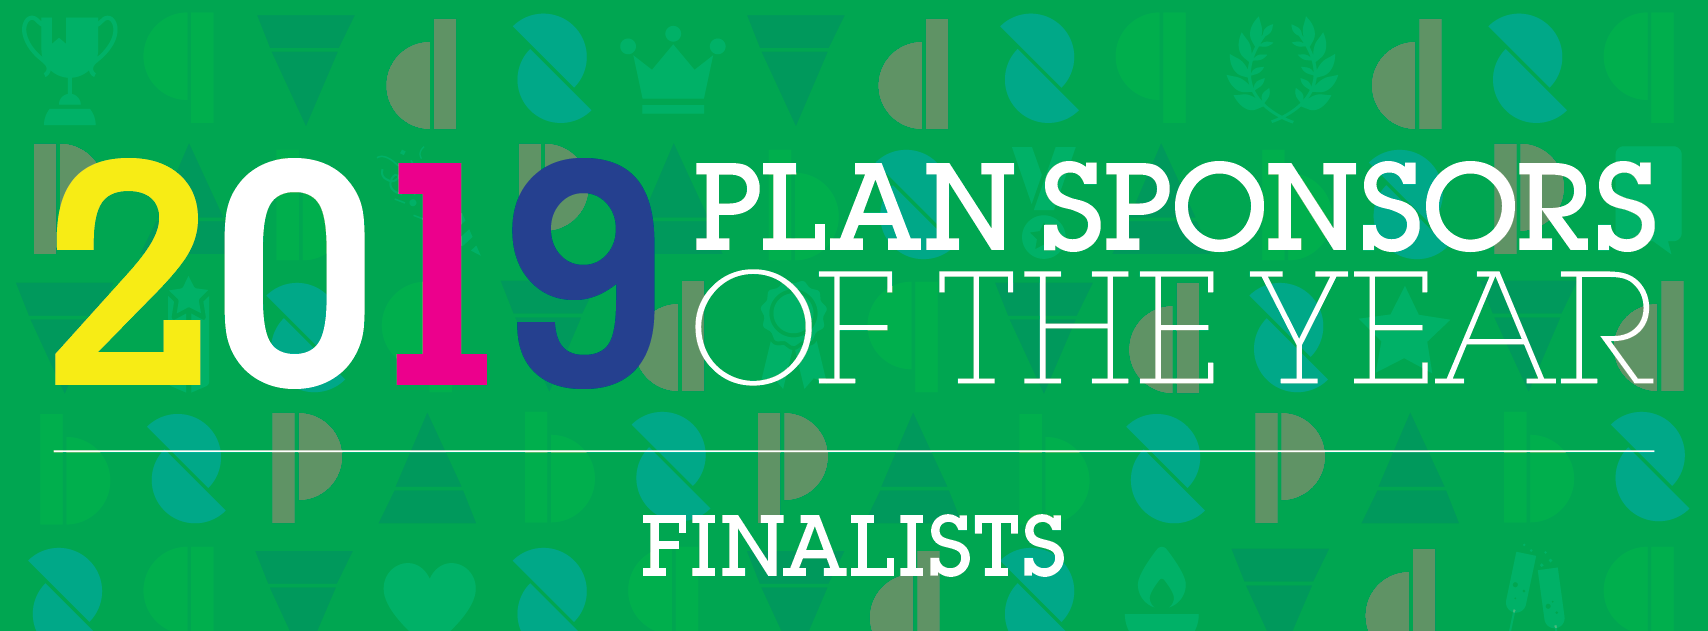 2019 Retirement Plan Sponsor of the Year Finalist.png